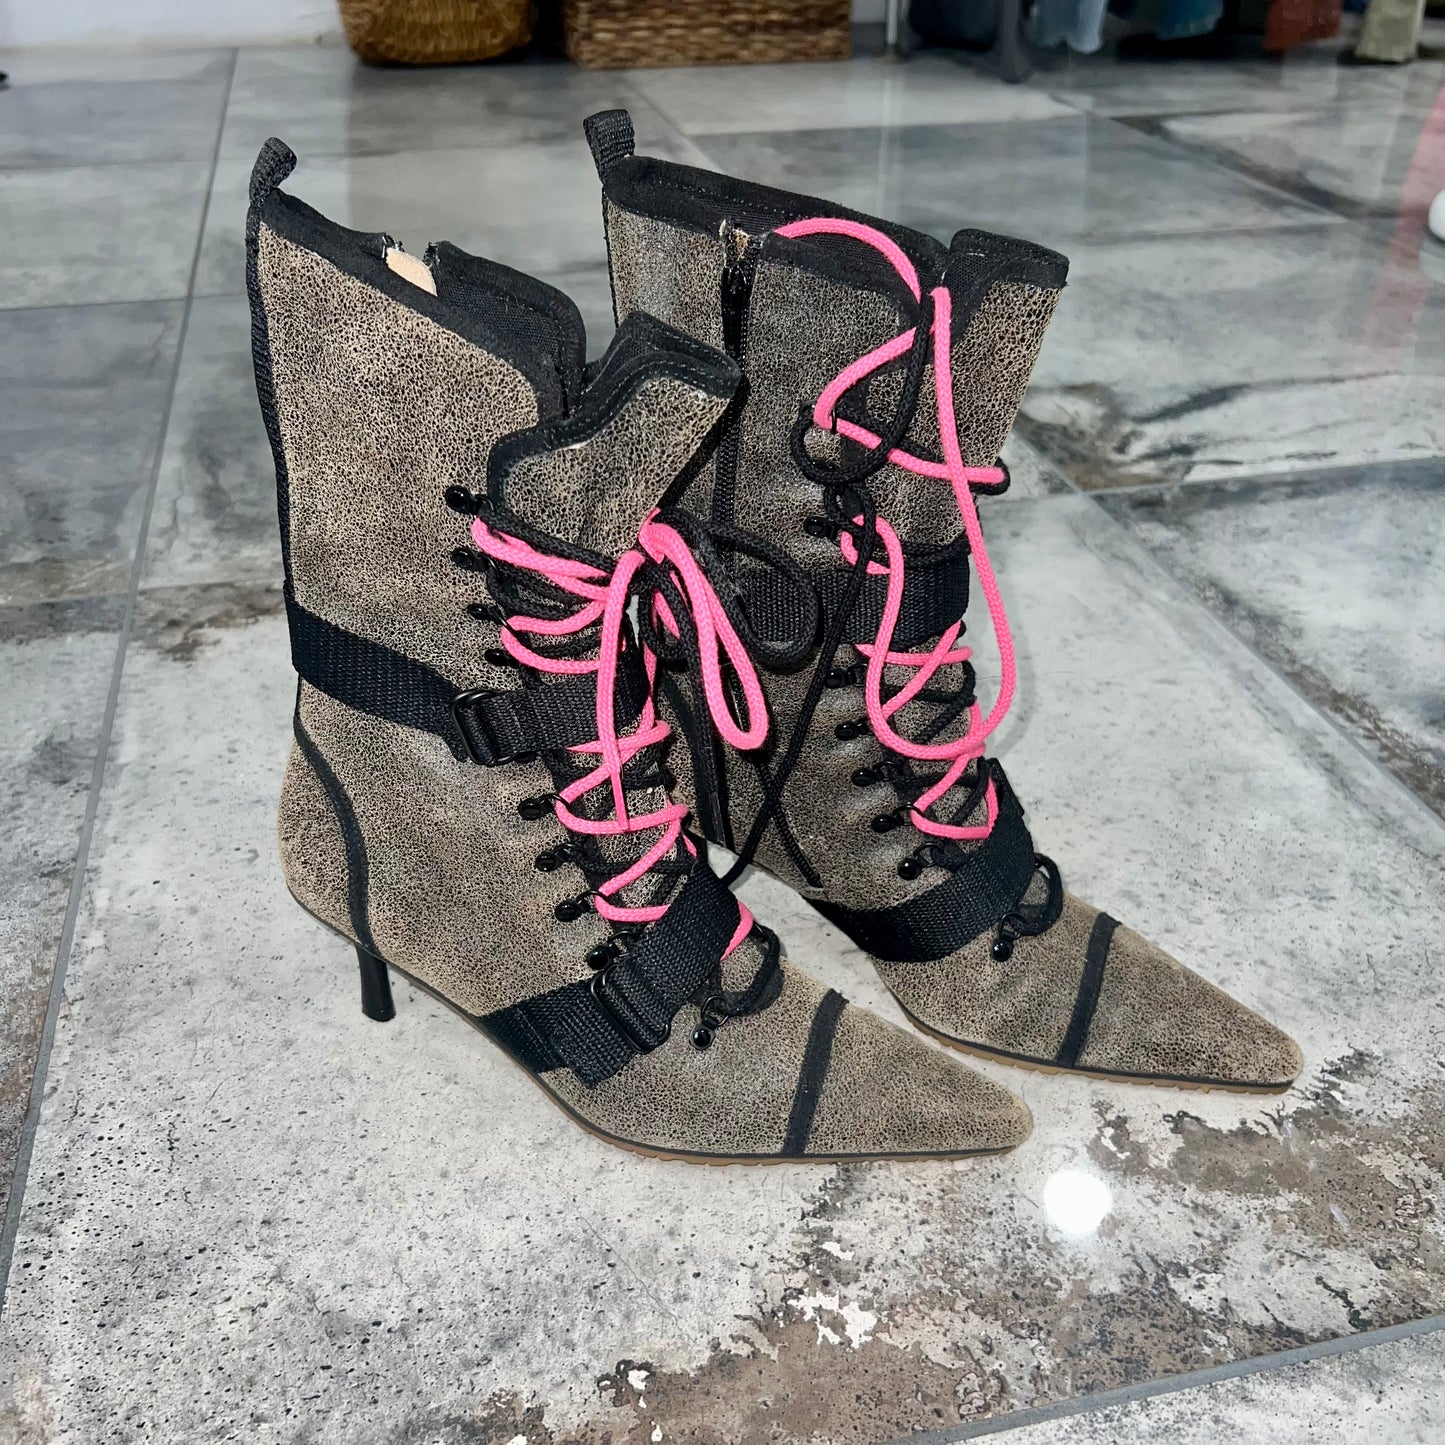 00s 'Diesel' Lace Up Boots